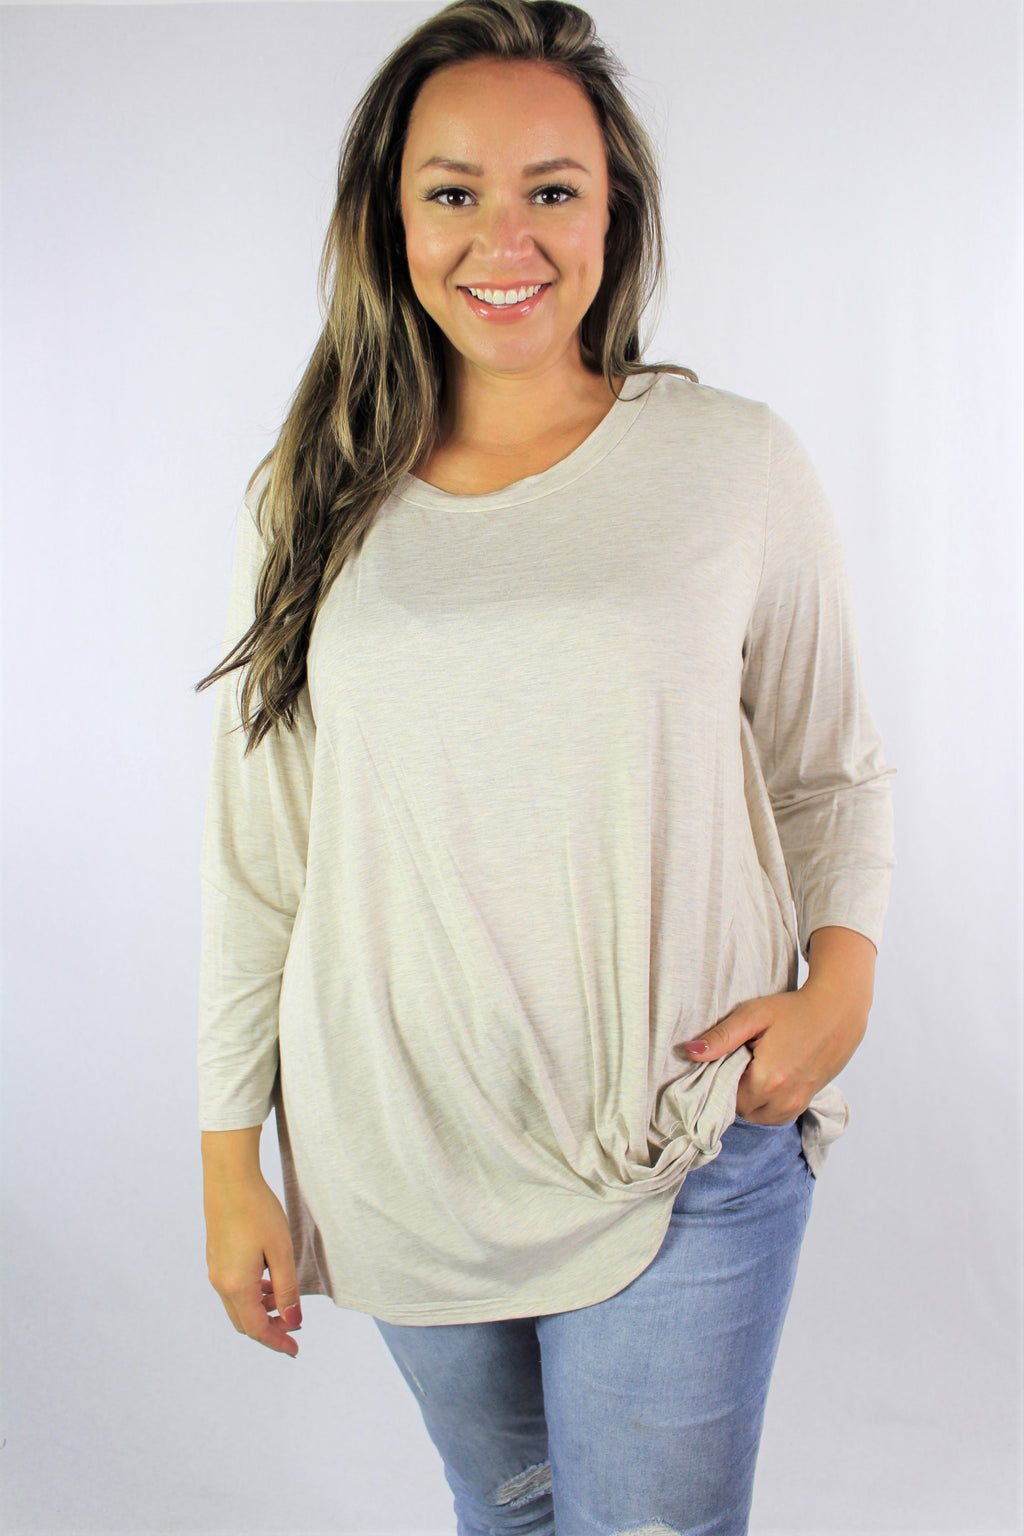 Women's Plus Size Long Sleeve Top with Front Twist *